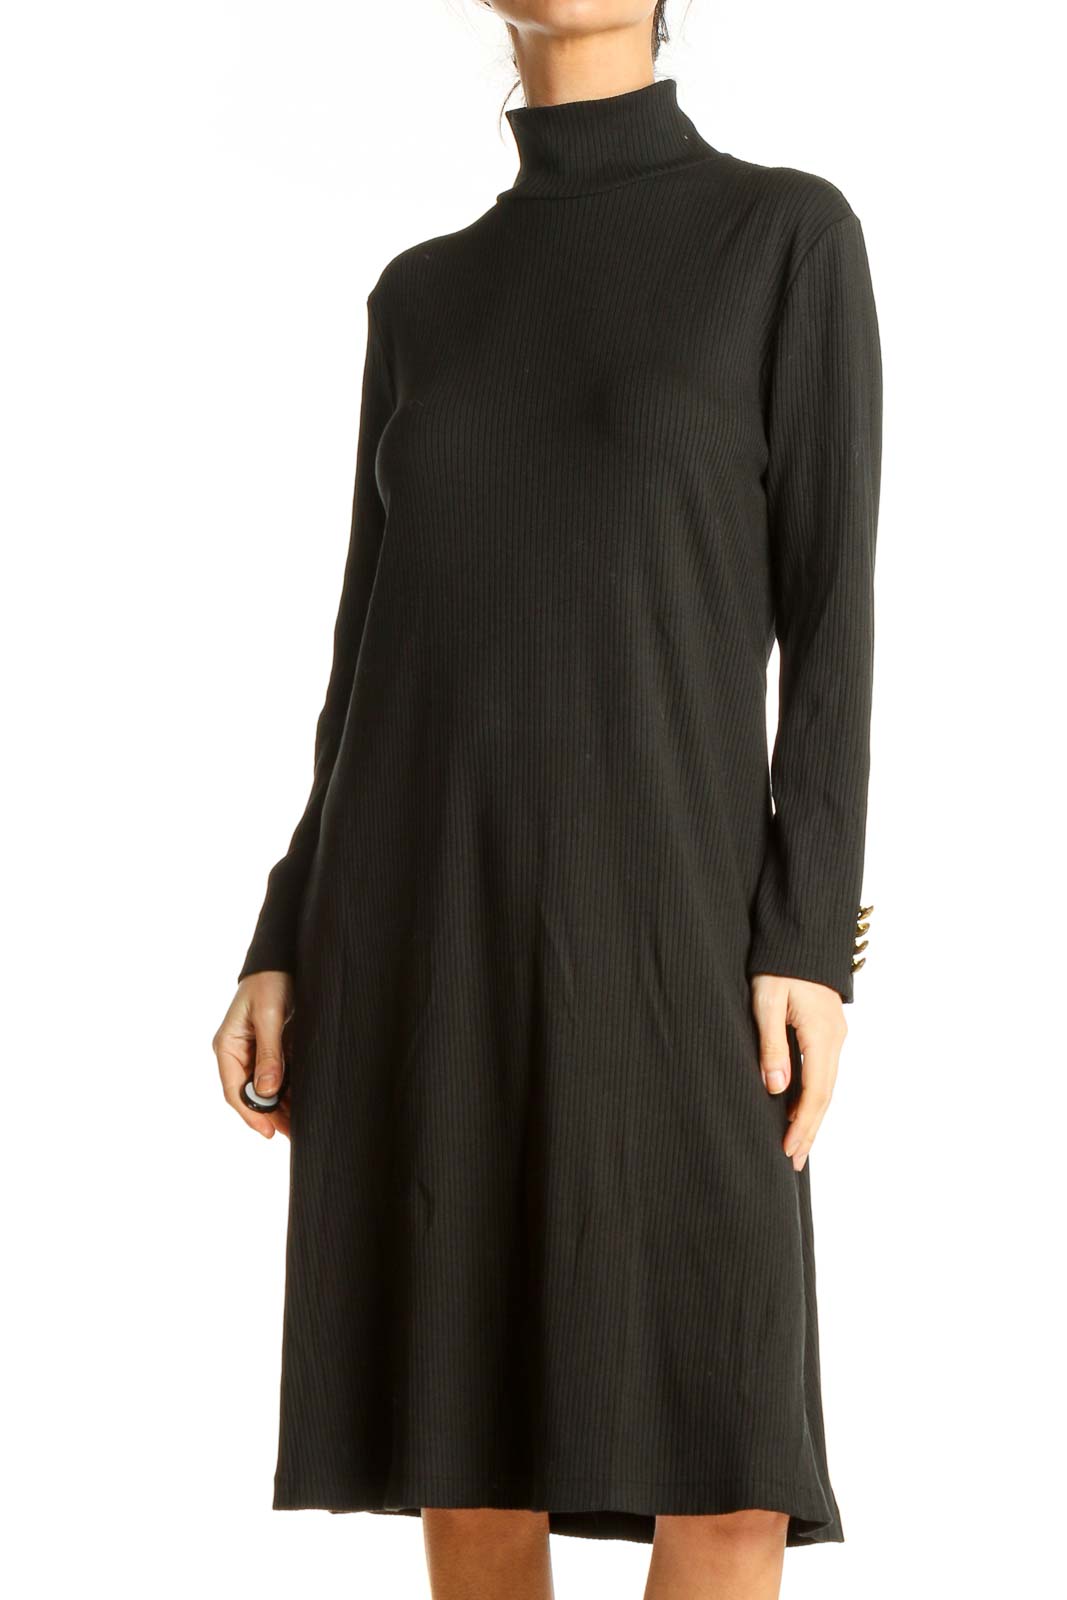 Black Classic Sweater Dress Front